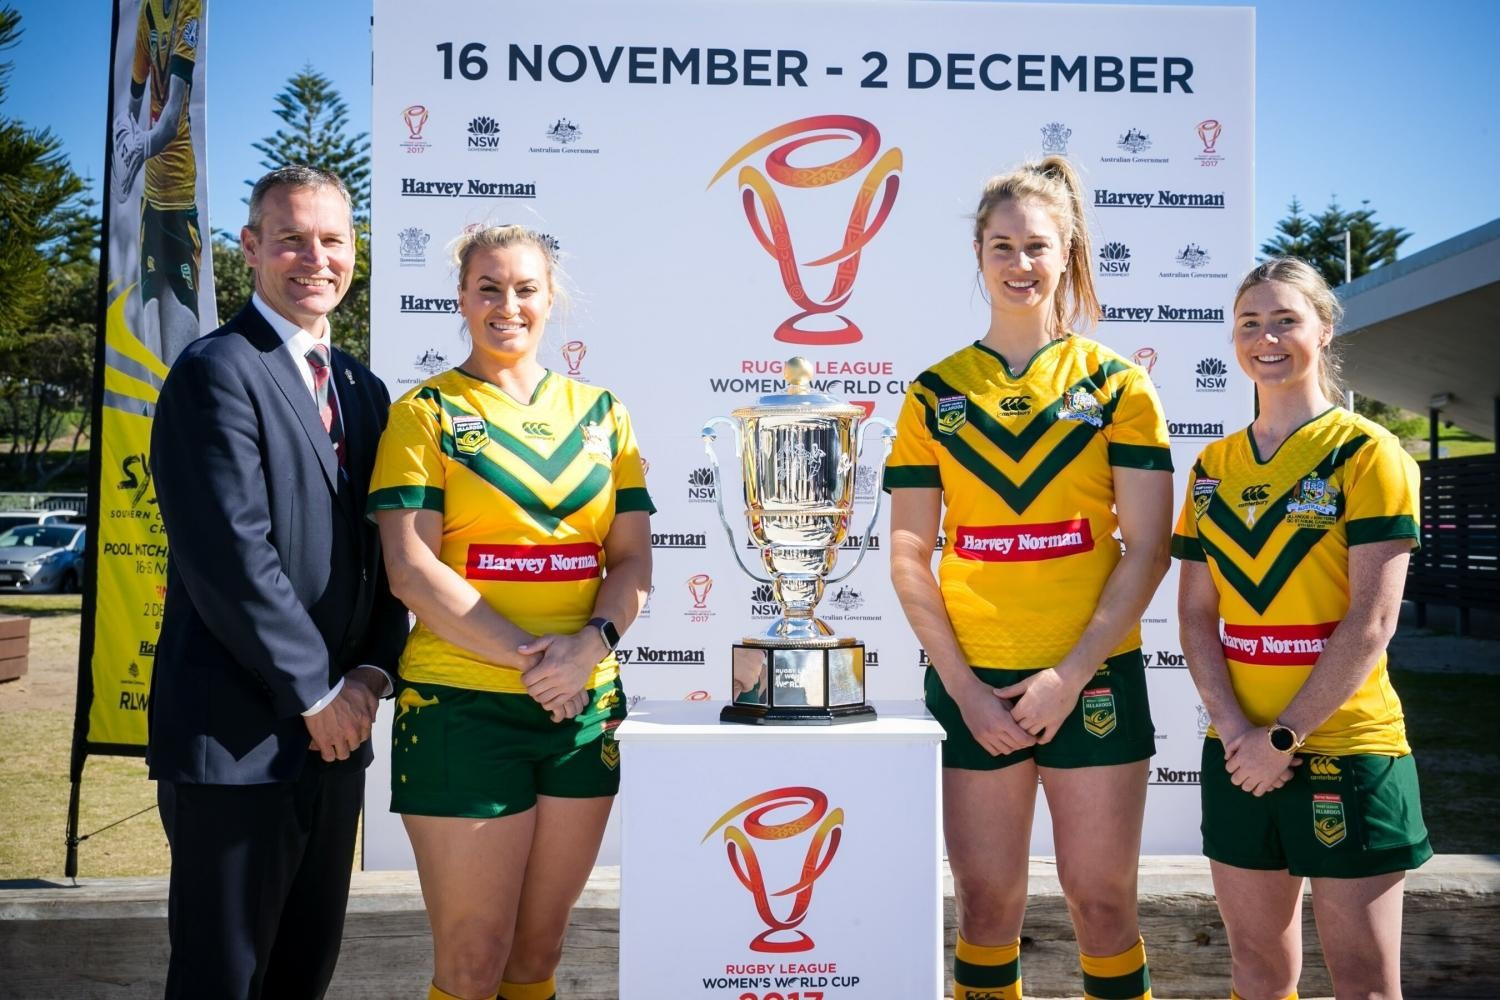 New trophy unveiled for Women's Rugby League World Cup with 100 days to go